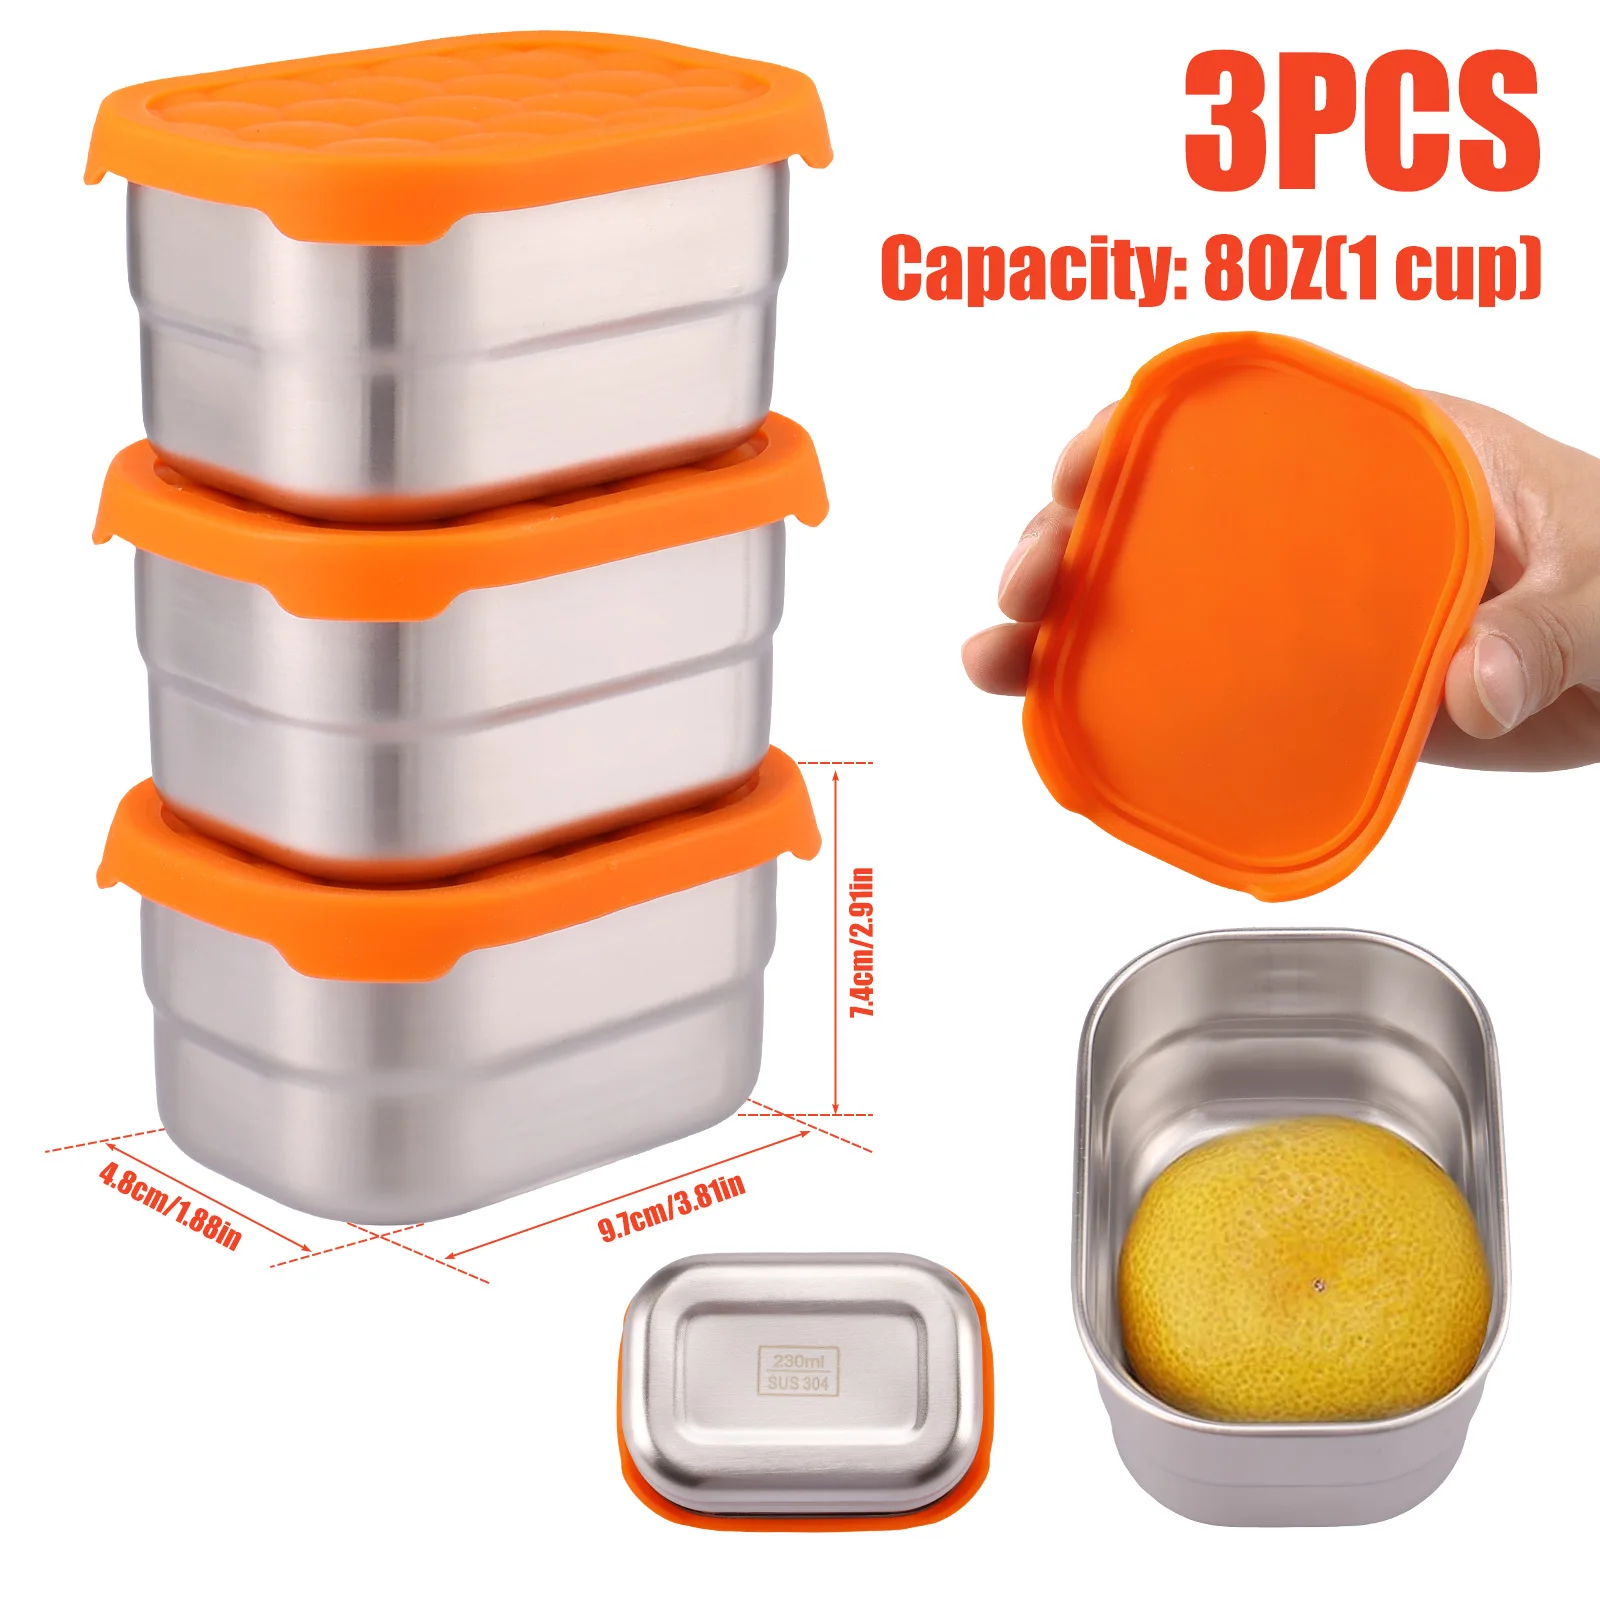 https://ae01.alicdn.com/kf/S6af6f2157f3c43c78bace32c218bbadaH/3Pcs-Stainless-Steel-Snack-Containers-with-Silicone-Lid-Portable-Leakproof-Snack-Fruit-Storage-Box-for-Kids.jpg